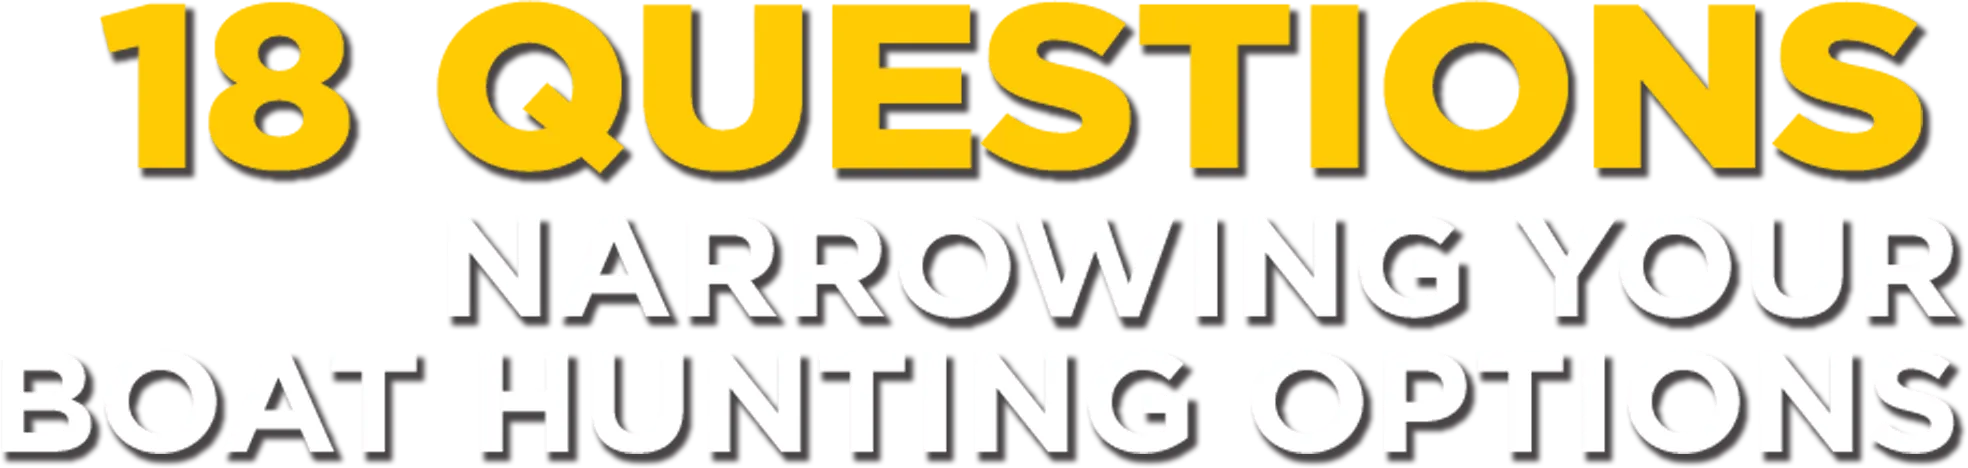 18 Questions: Narrowing Your Boat Hunting Options